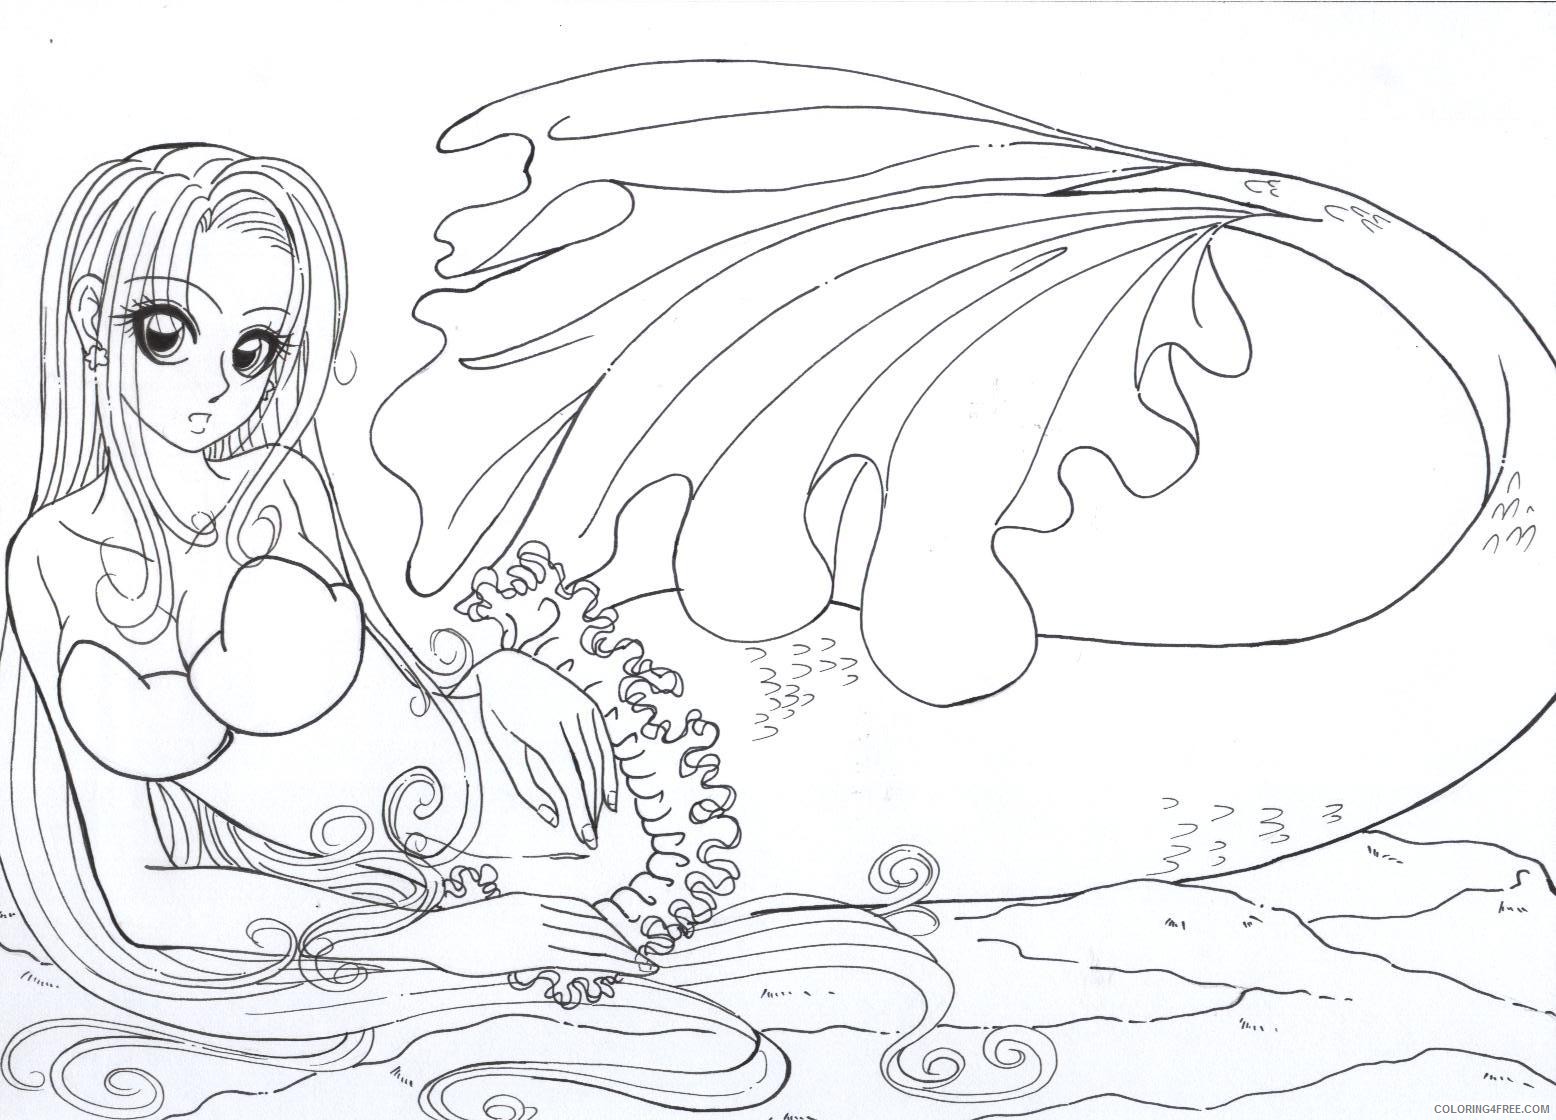 mermaid coloring pages for adults Coloring4free